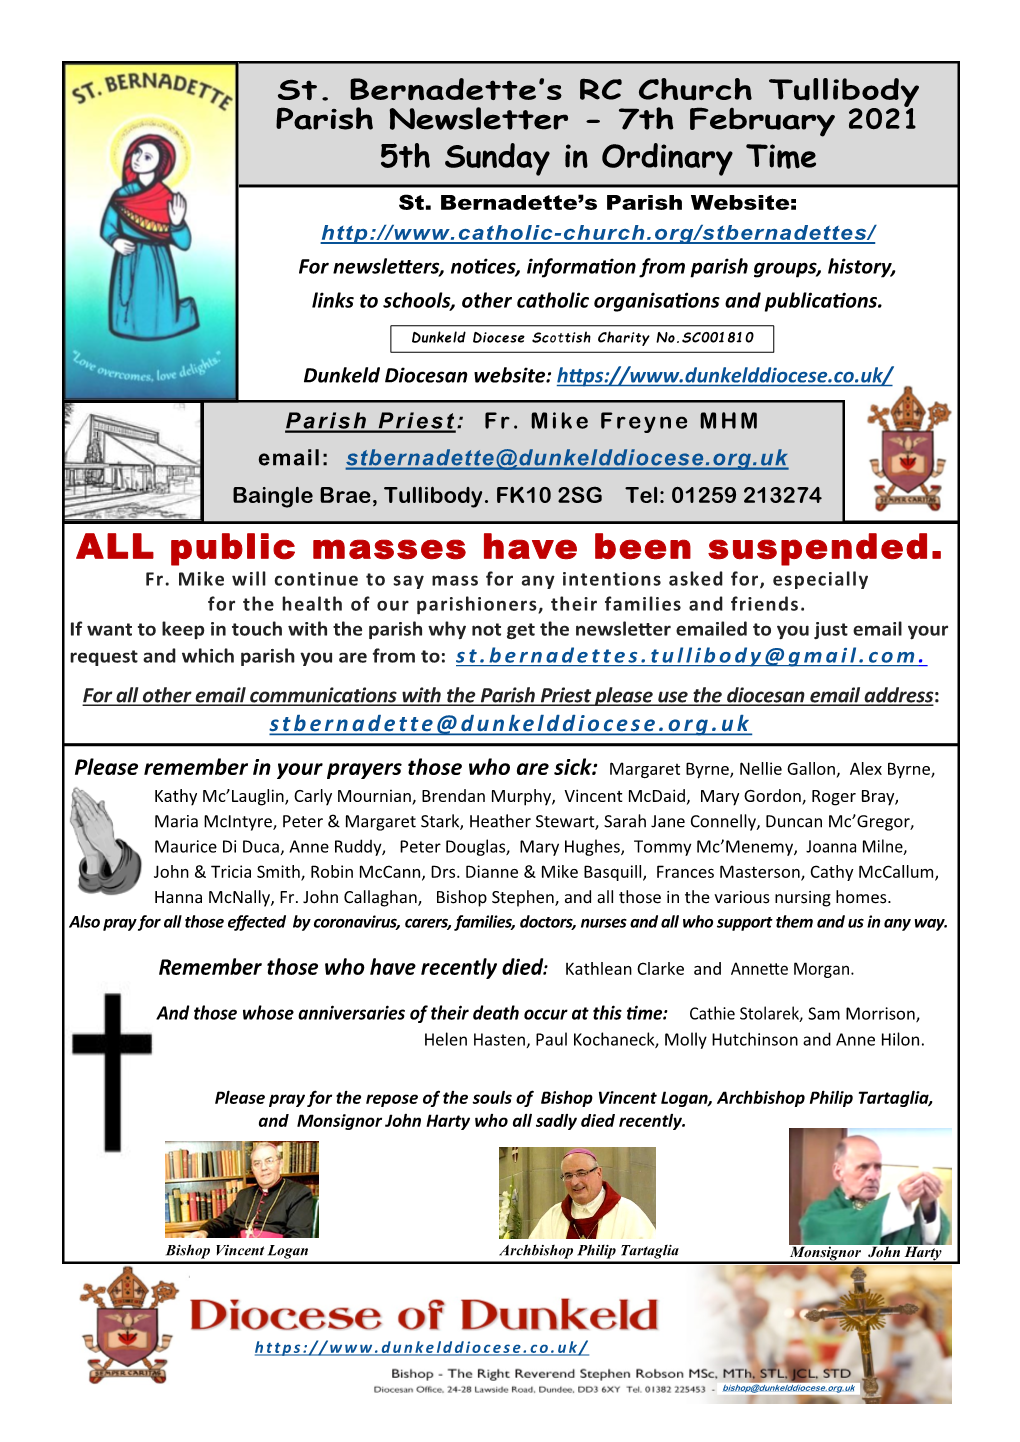 Public Masses Have Been Suspended. Fr